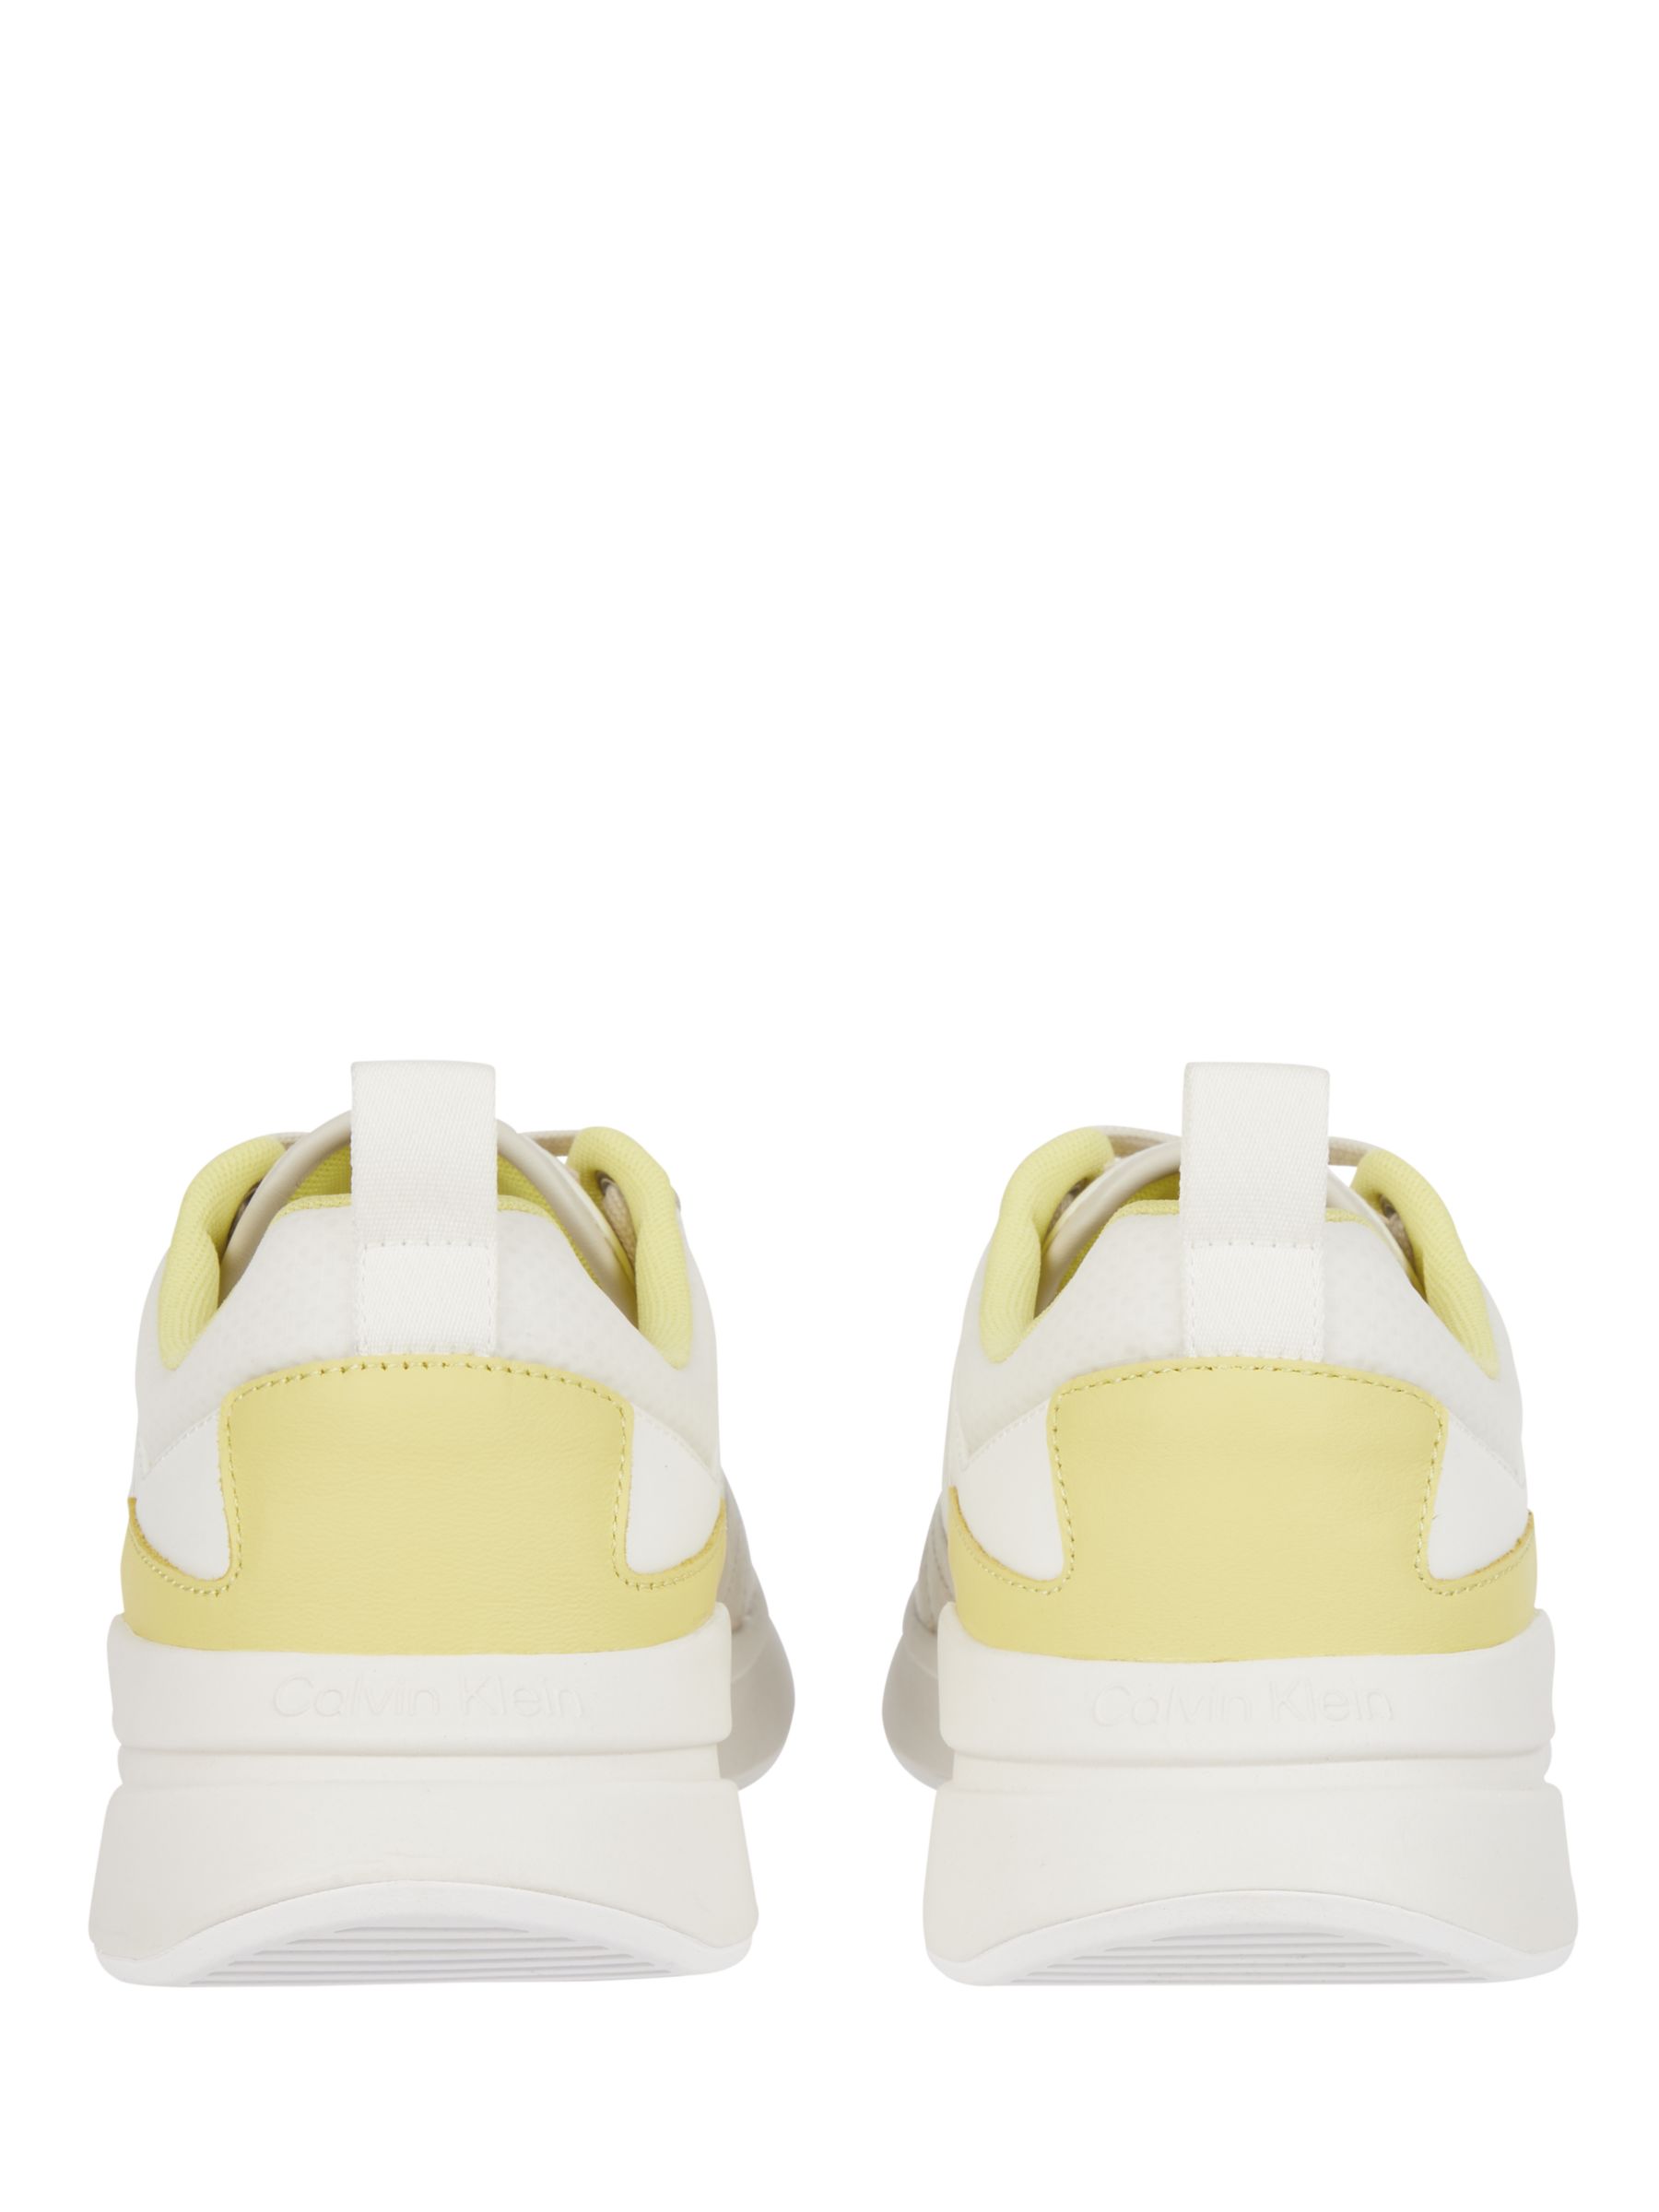 Calvin Klein Leather Low Top Chunky Heel Trainers, Marshmallow/Acacia, 7